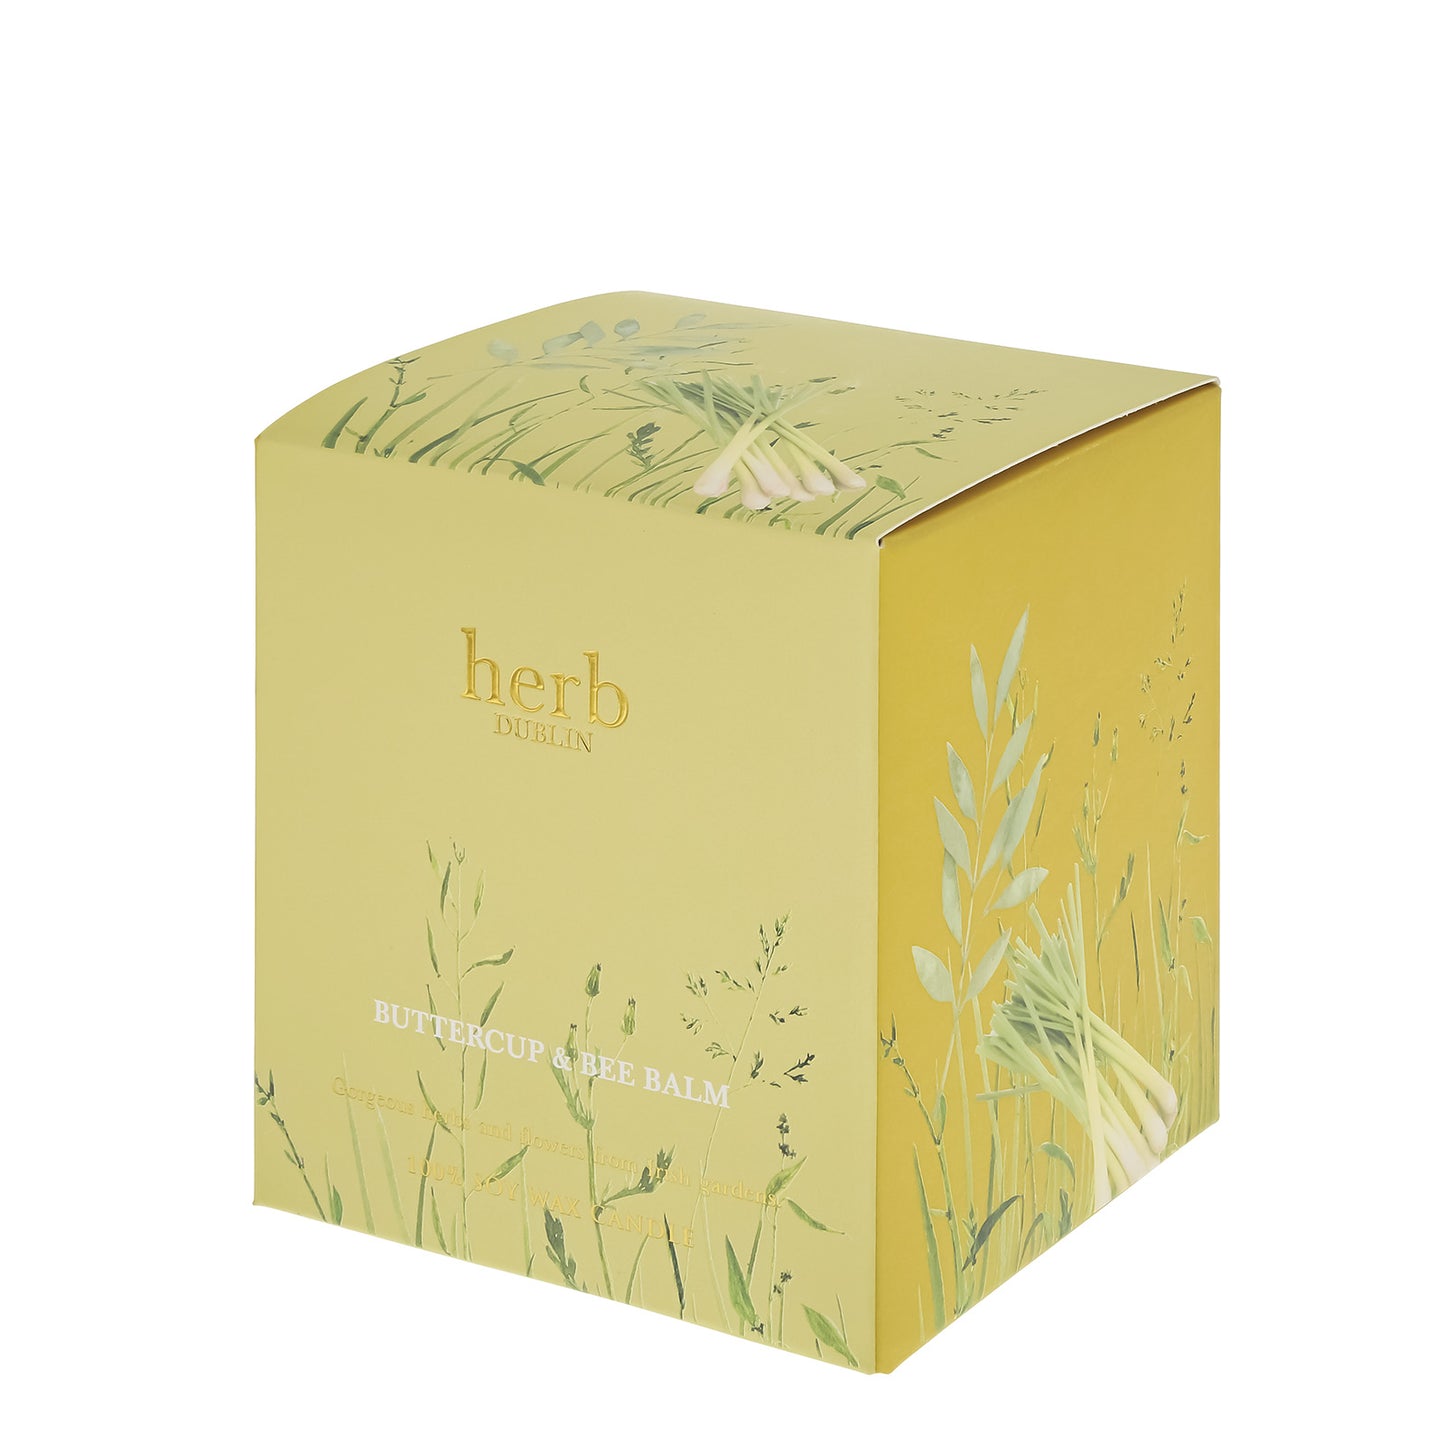 Herb Dublin Buttercup and Bee Balm Candle